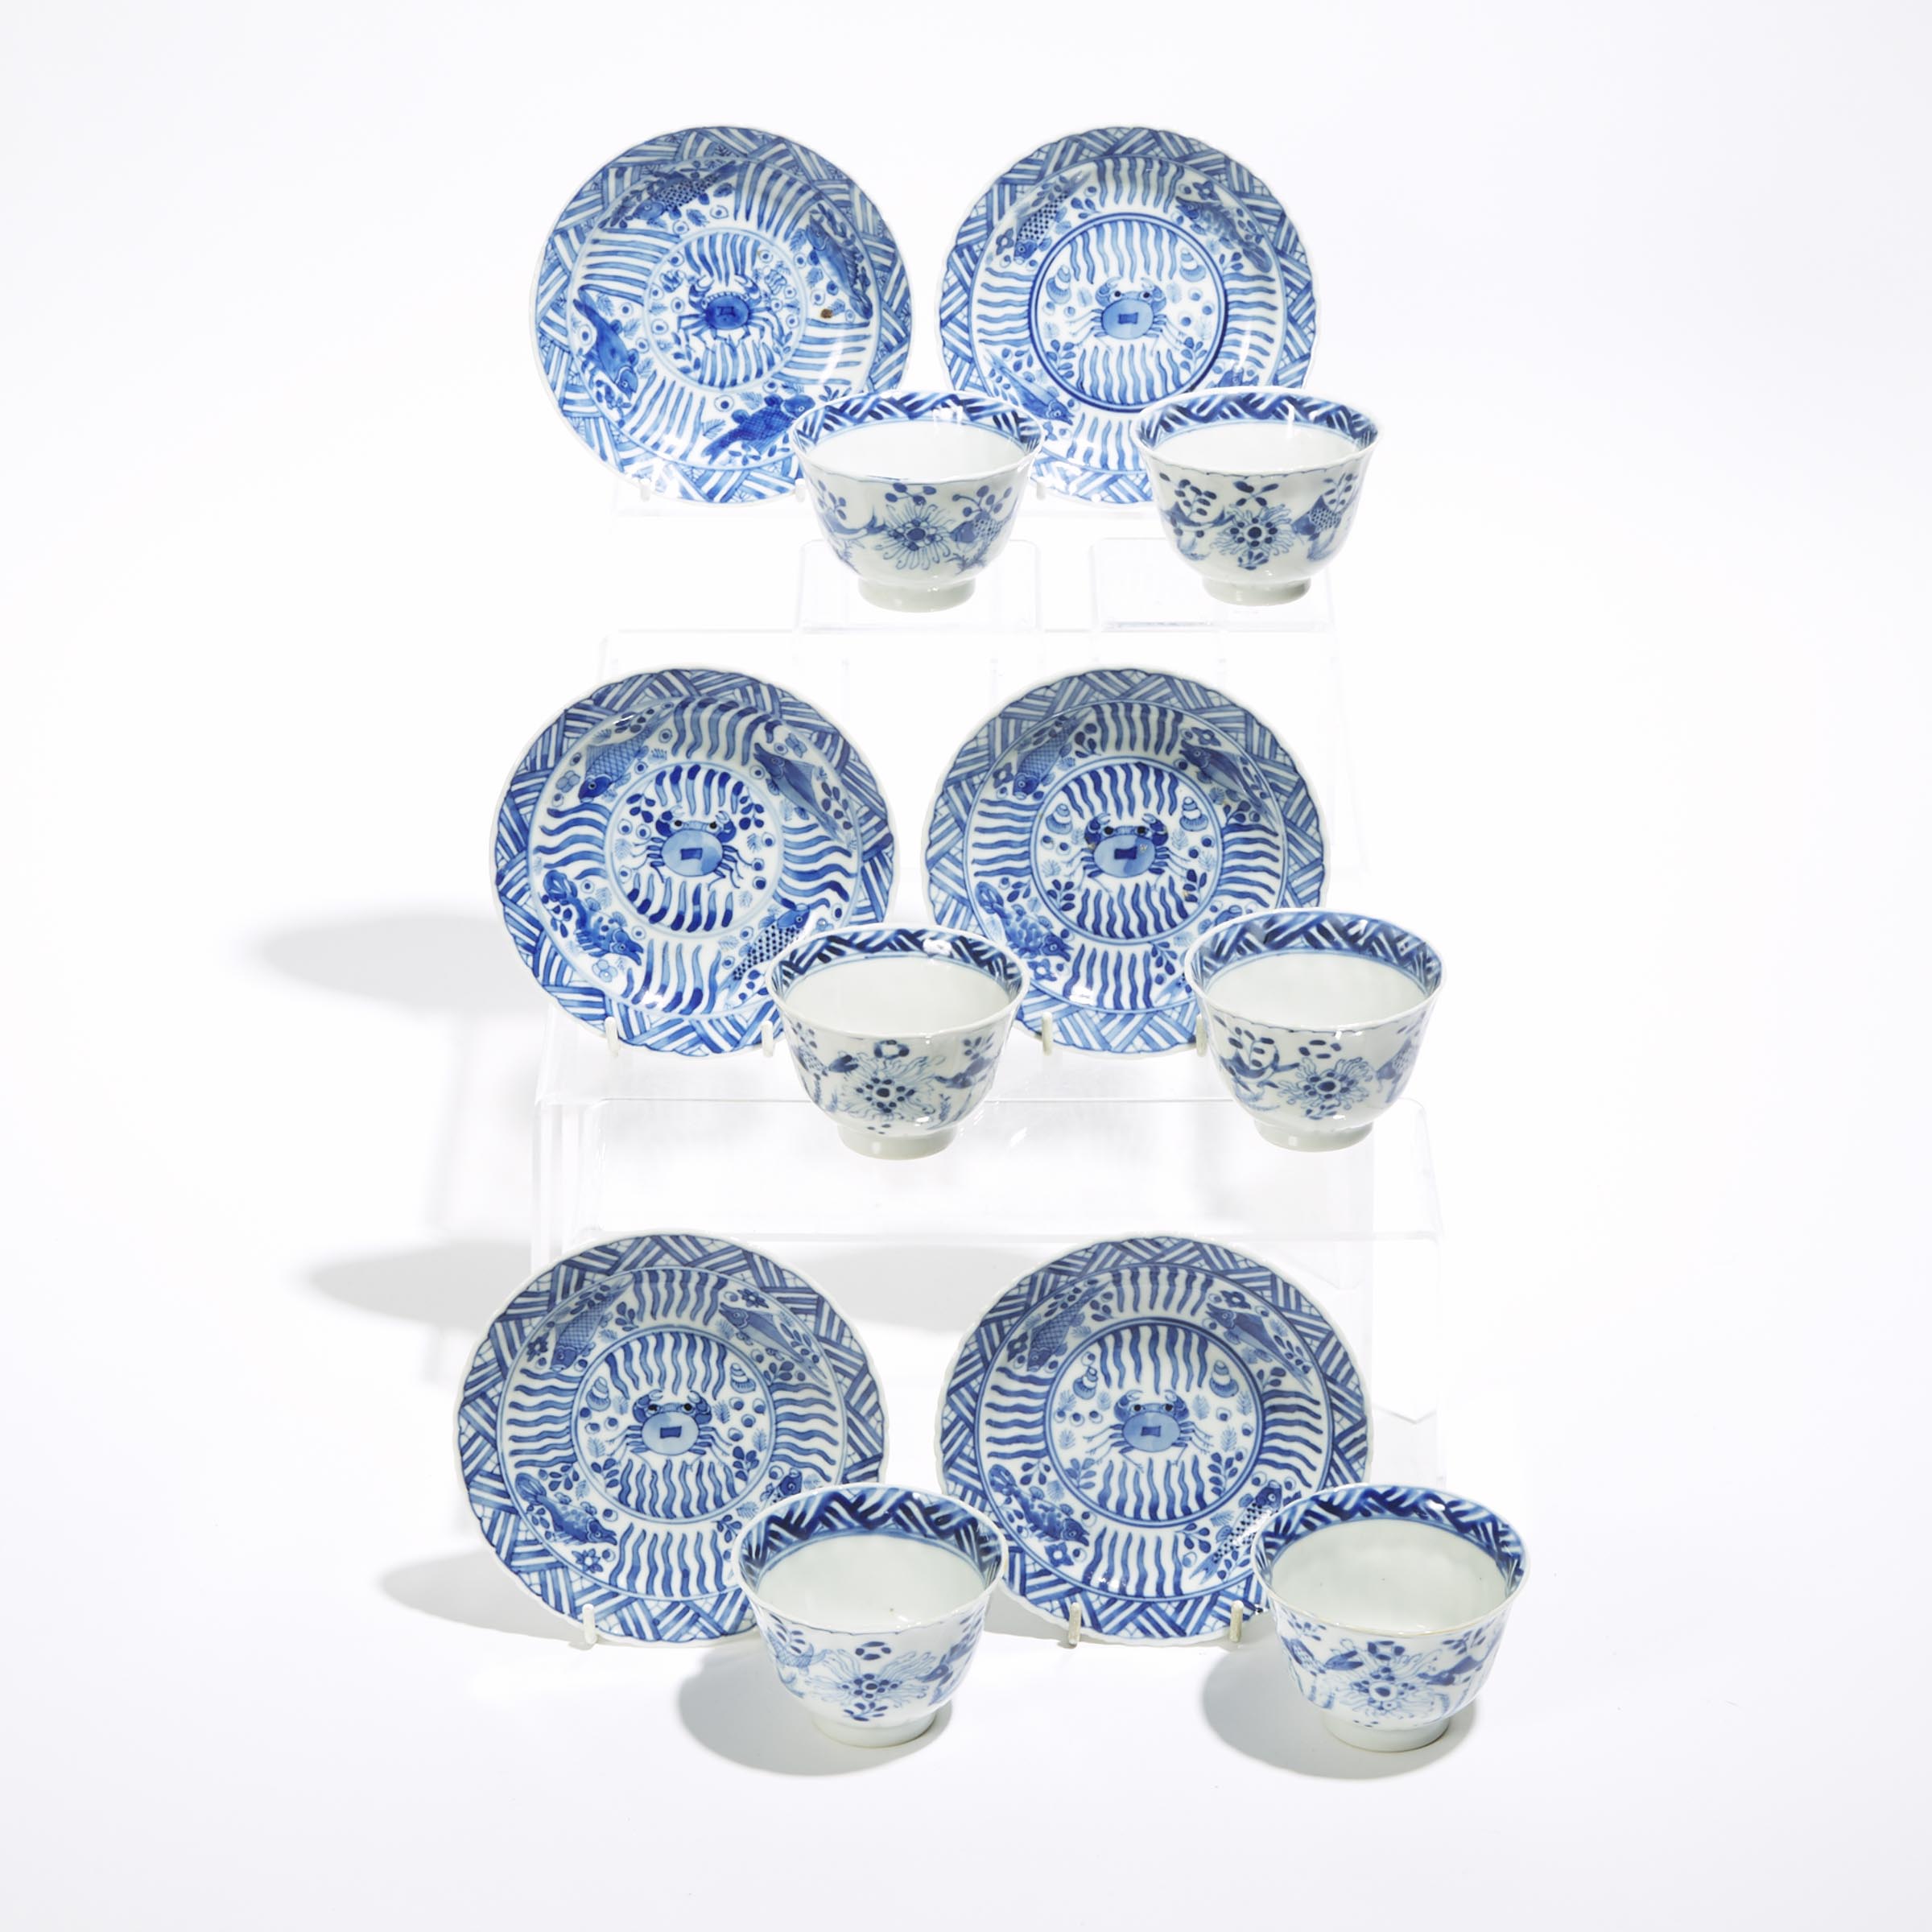 A Set of Twelve 'Crabs and Fish' Cups and Saucers, Kangxi Mark and Period (1662-1722)